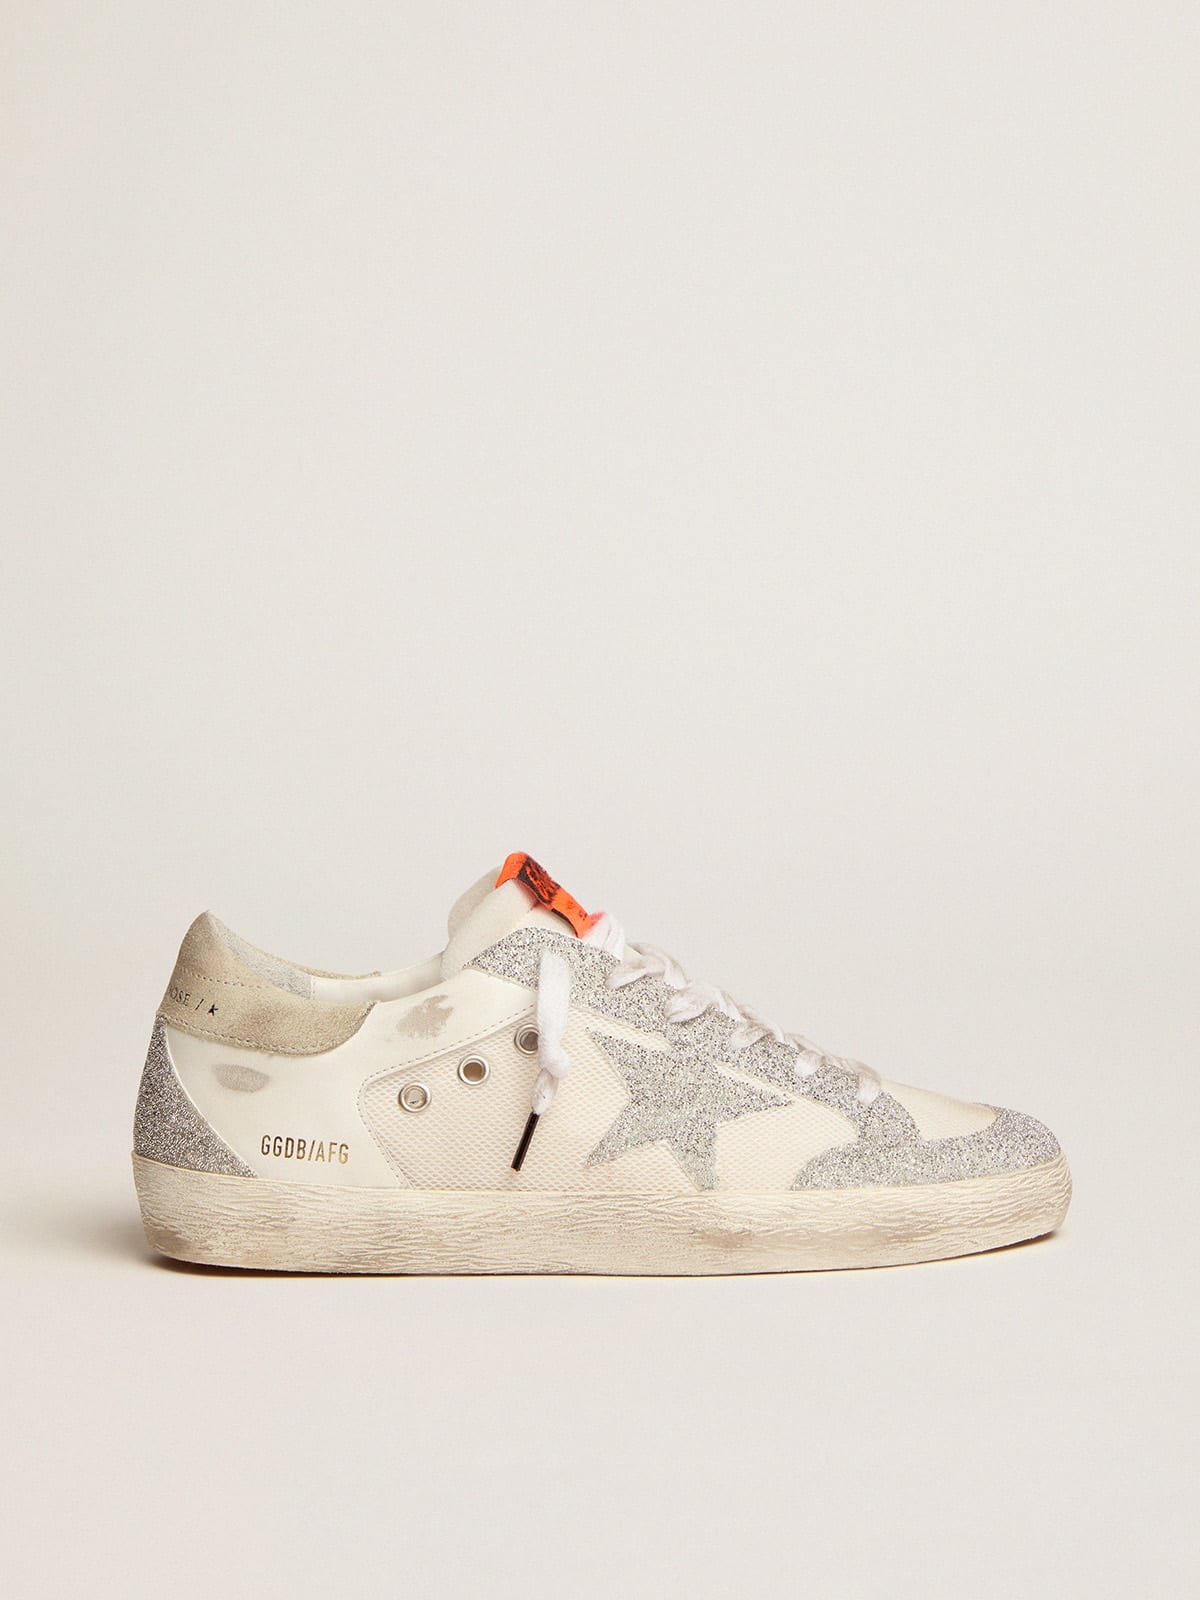 Golden Goose - Super-Star LTD in white leather and mesh with star and inserts in silver Swarovski micro-crystals in 